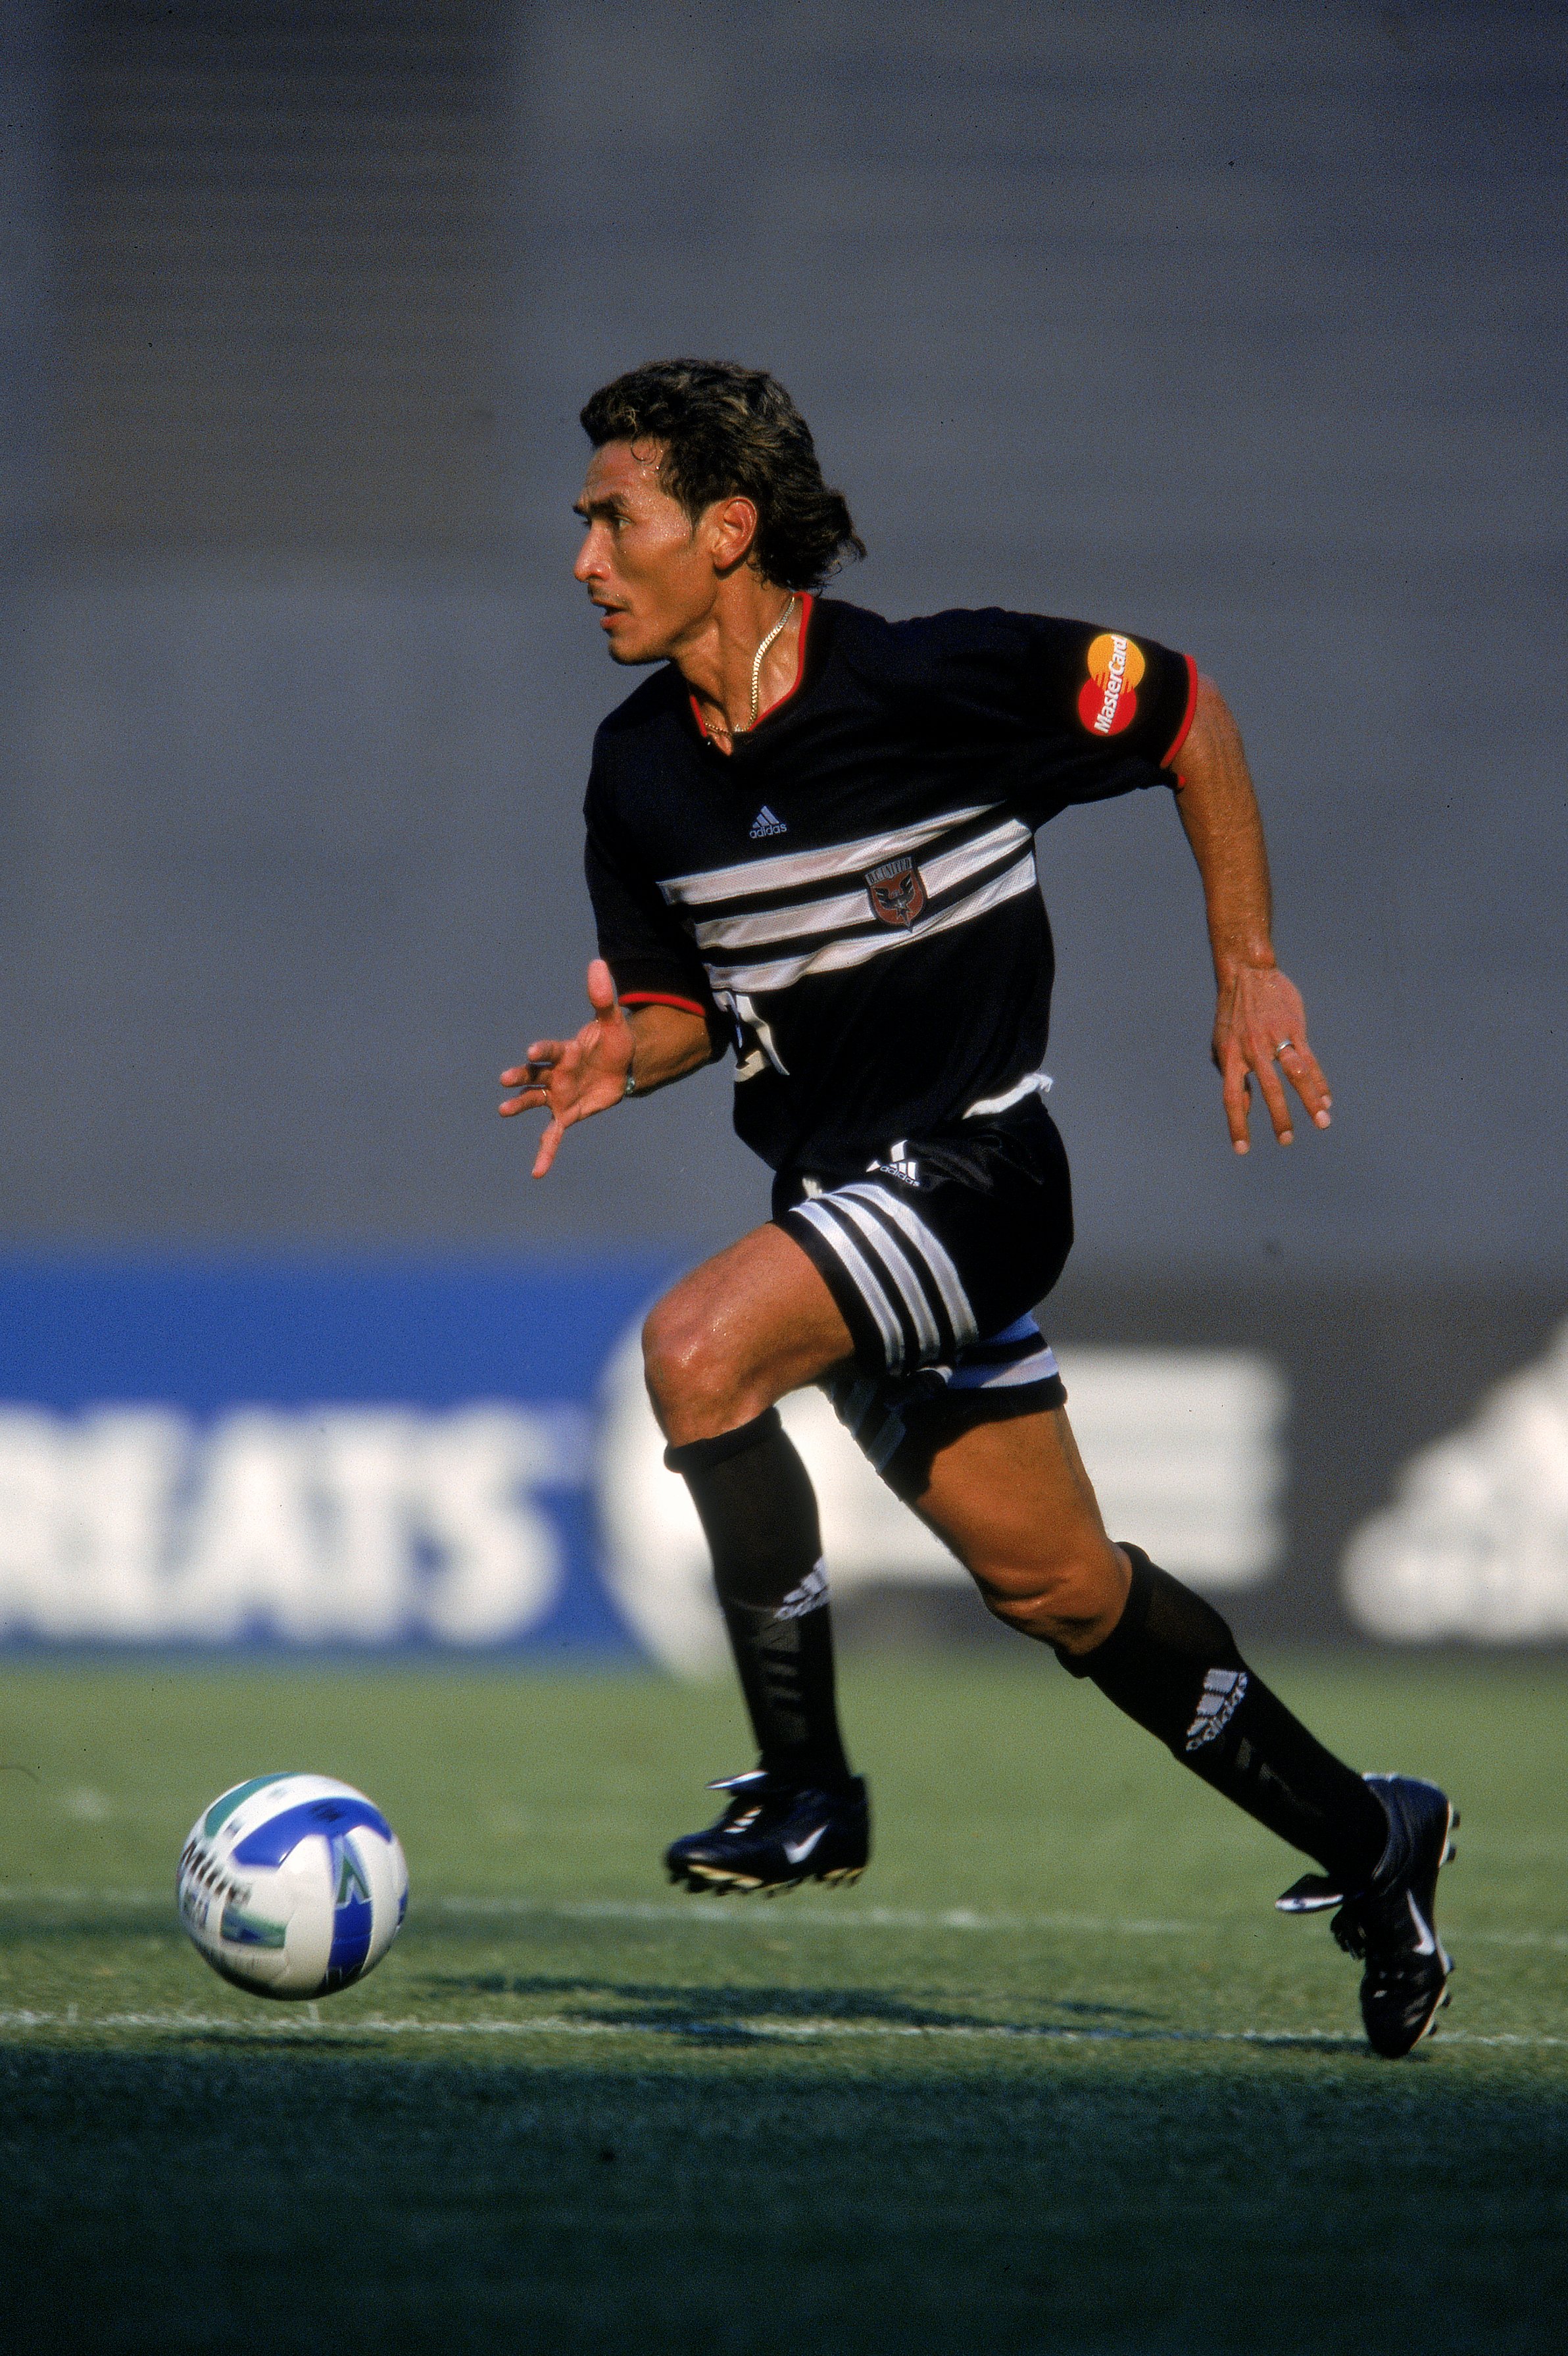 24 Jun 2000: Raul Diaz Arce #21 of the D.C. United controls the ball during a game against the Dallas Burn at RFK Stadium in Washington, D.C.  The United defeated the Burn 2-0.Mandatory Credit: Greg Fiume  /Allsport